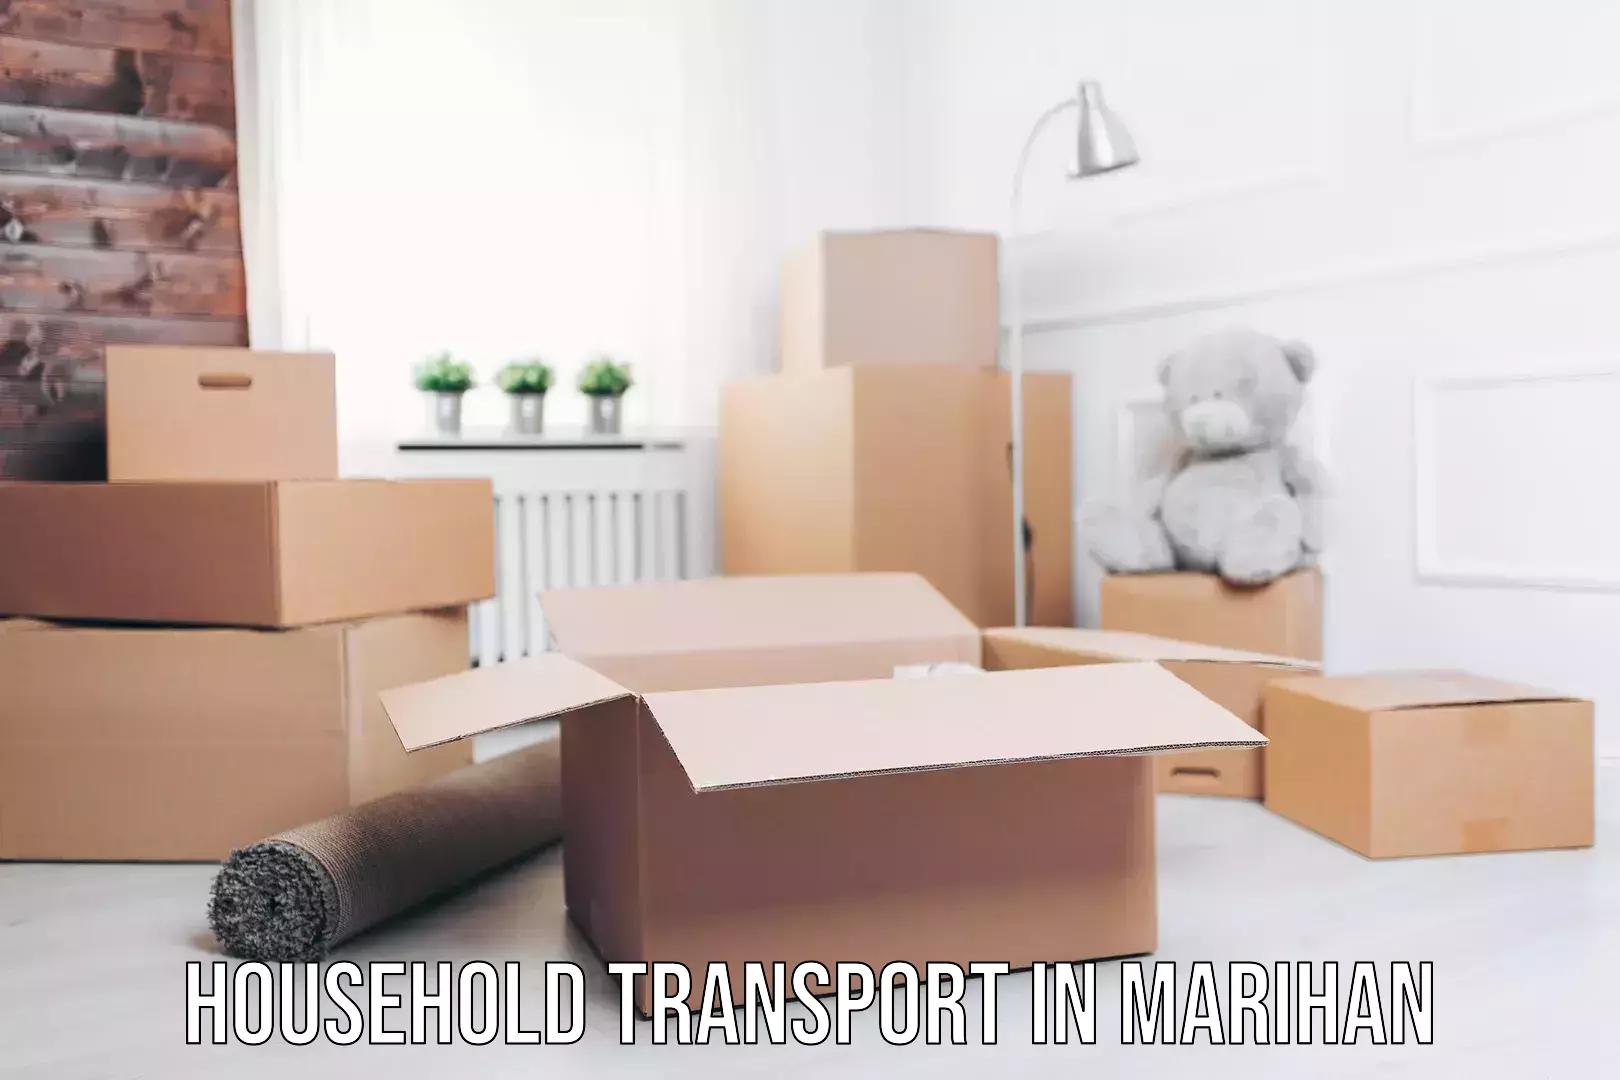 Professional home movers in Marihan